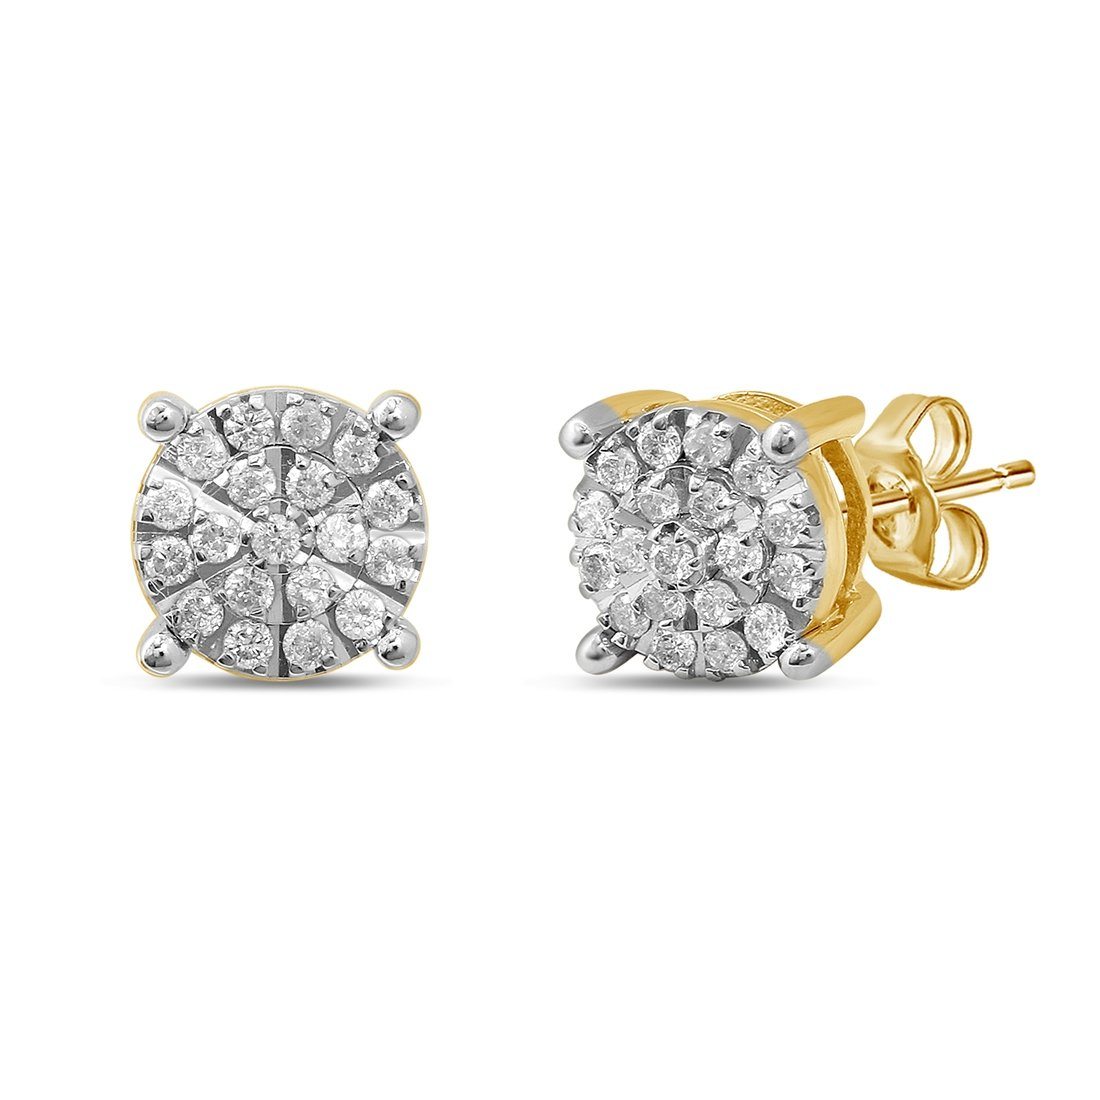 Martina Earrings with 1/4ct of Diamonds in 9ct Yellow Gold Earrings Bevilles 